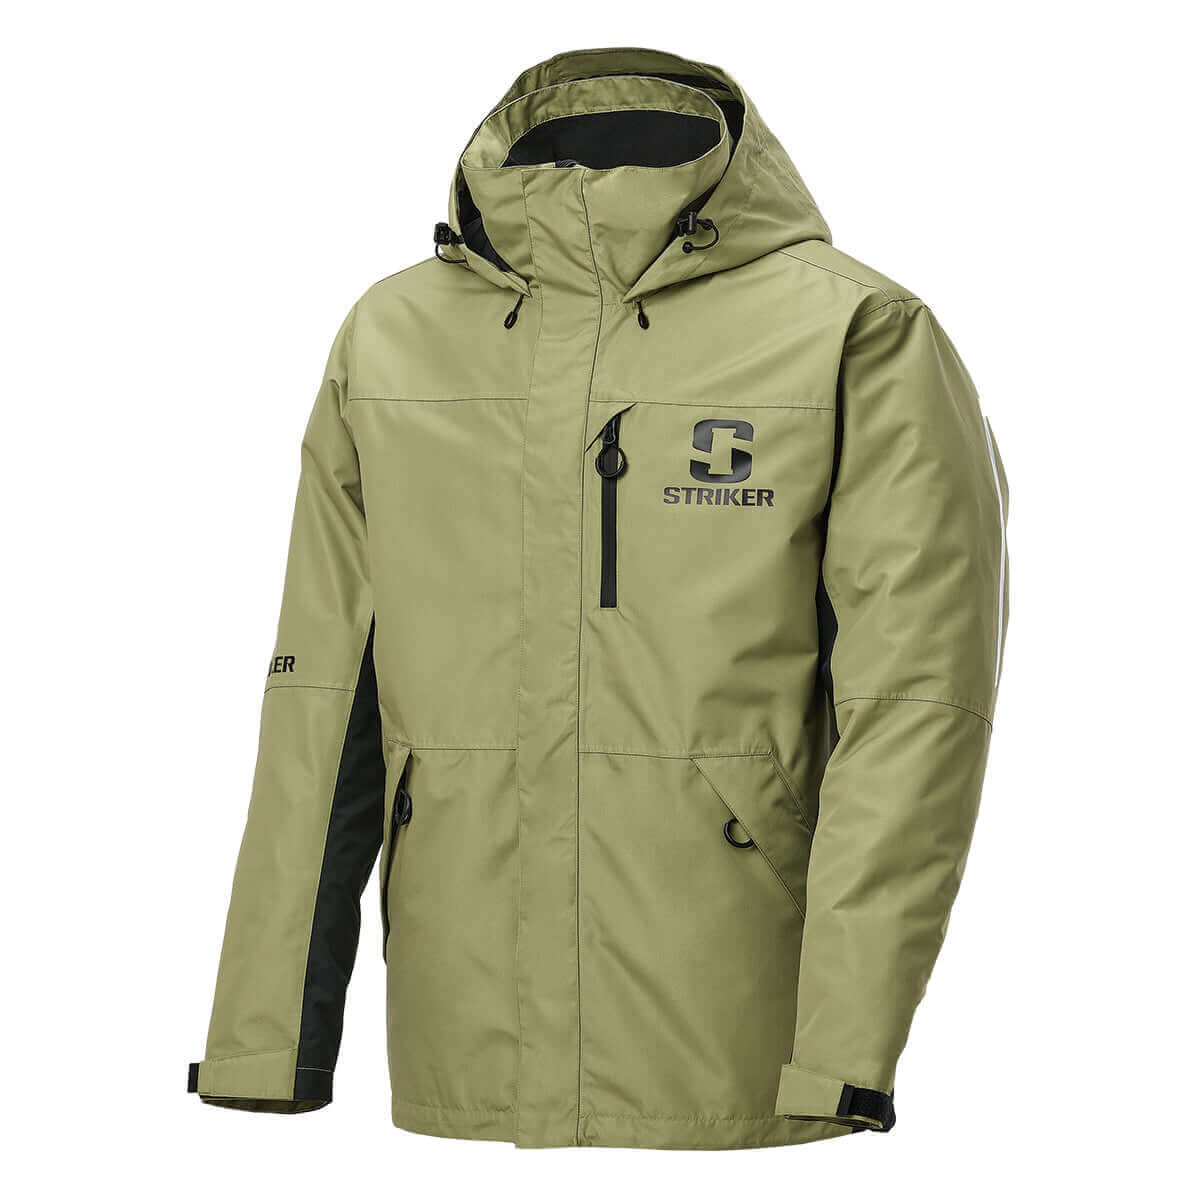 Stay Dry with Men's Depoe Bay Hooded Rain Jacket | Pendleton